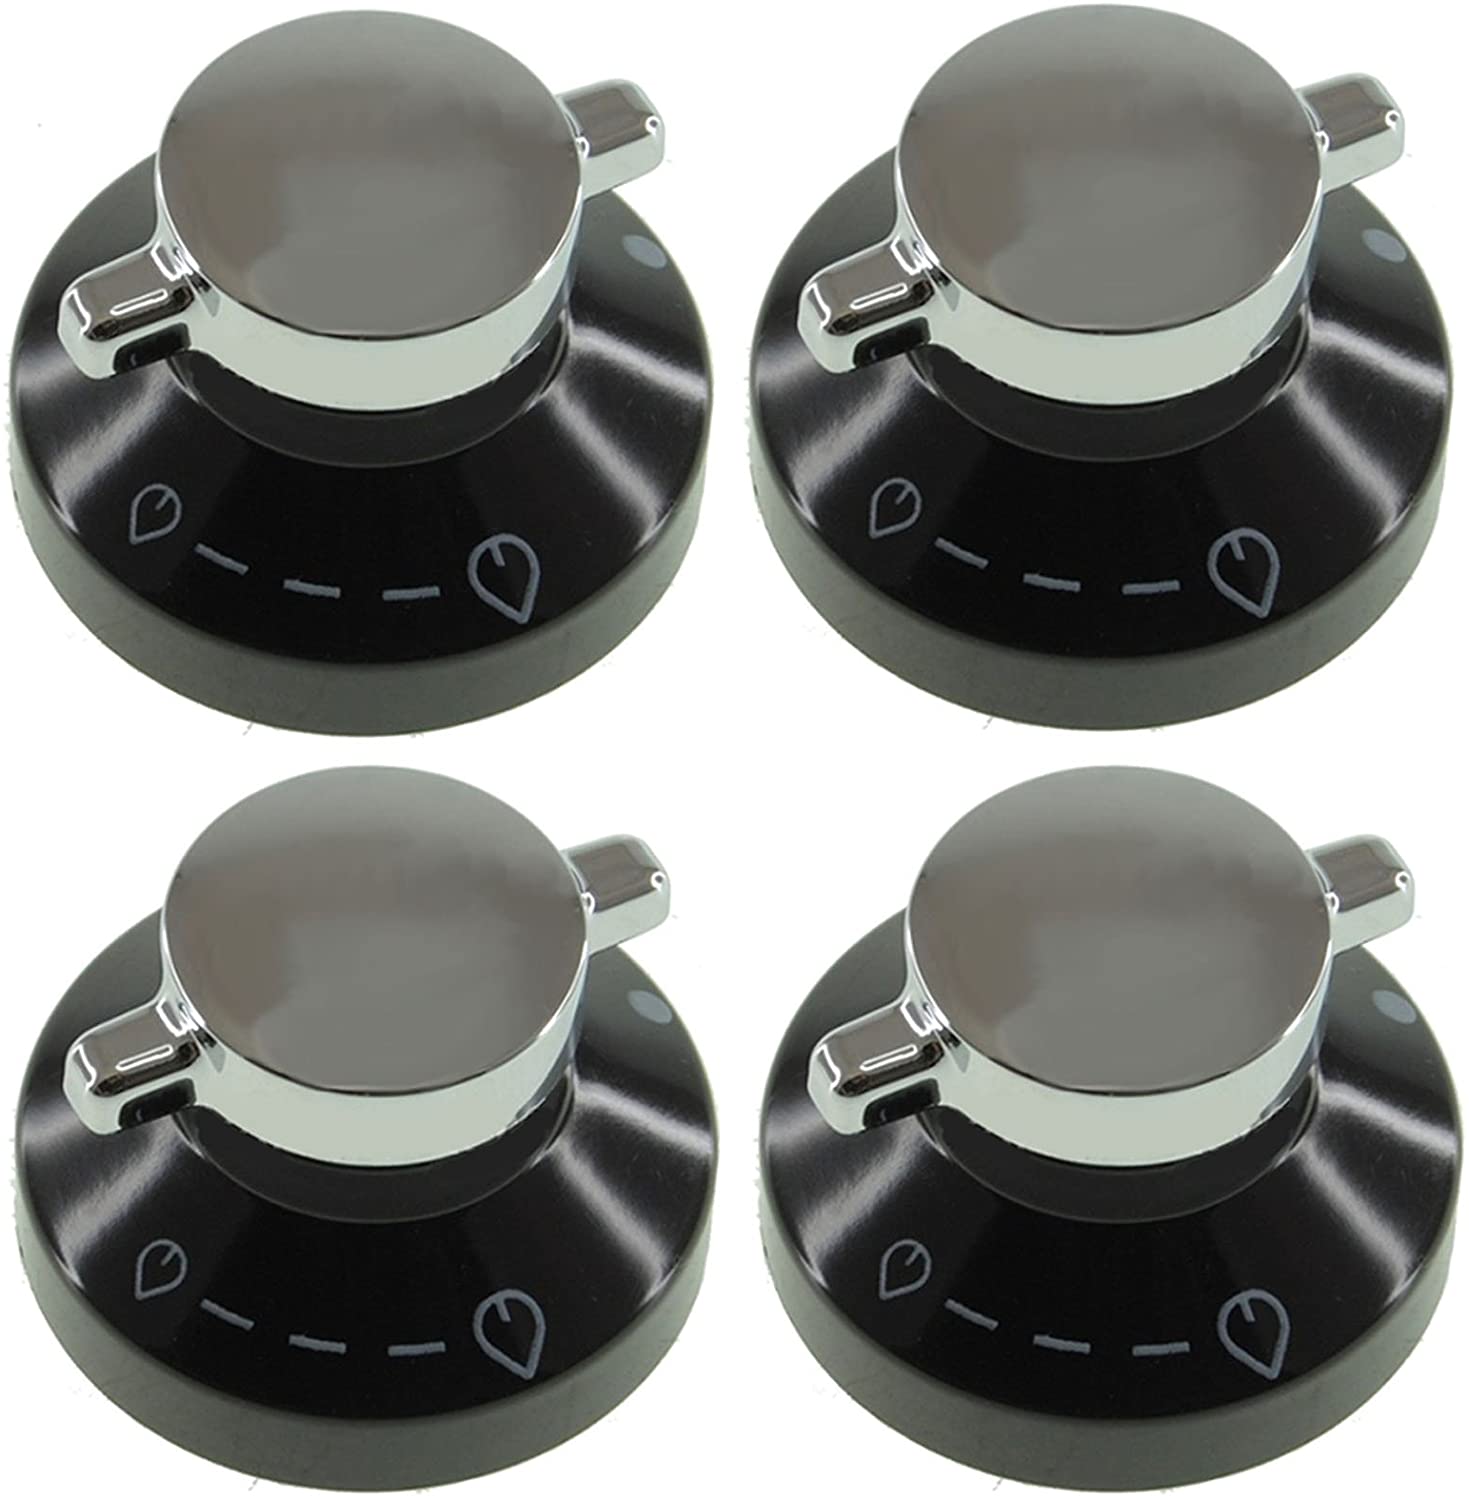 4 x Black Silver Knob Switch for GLEN DIMPLEX Gas Oven Cooker Grill Hob